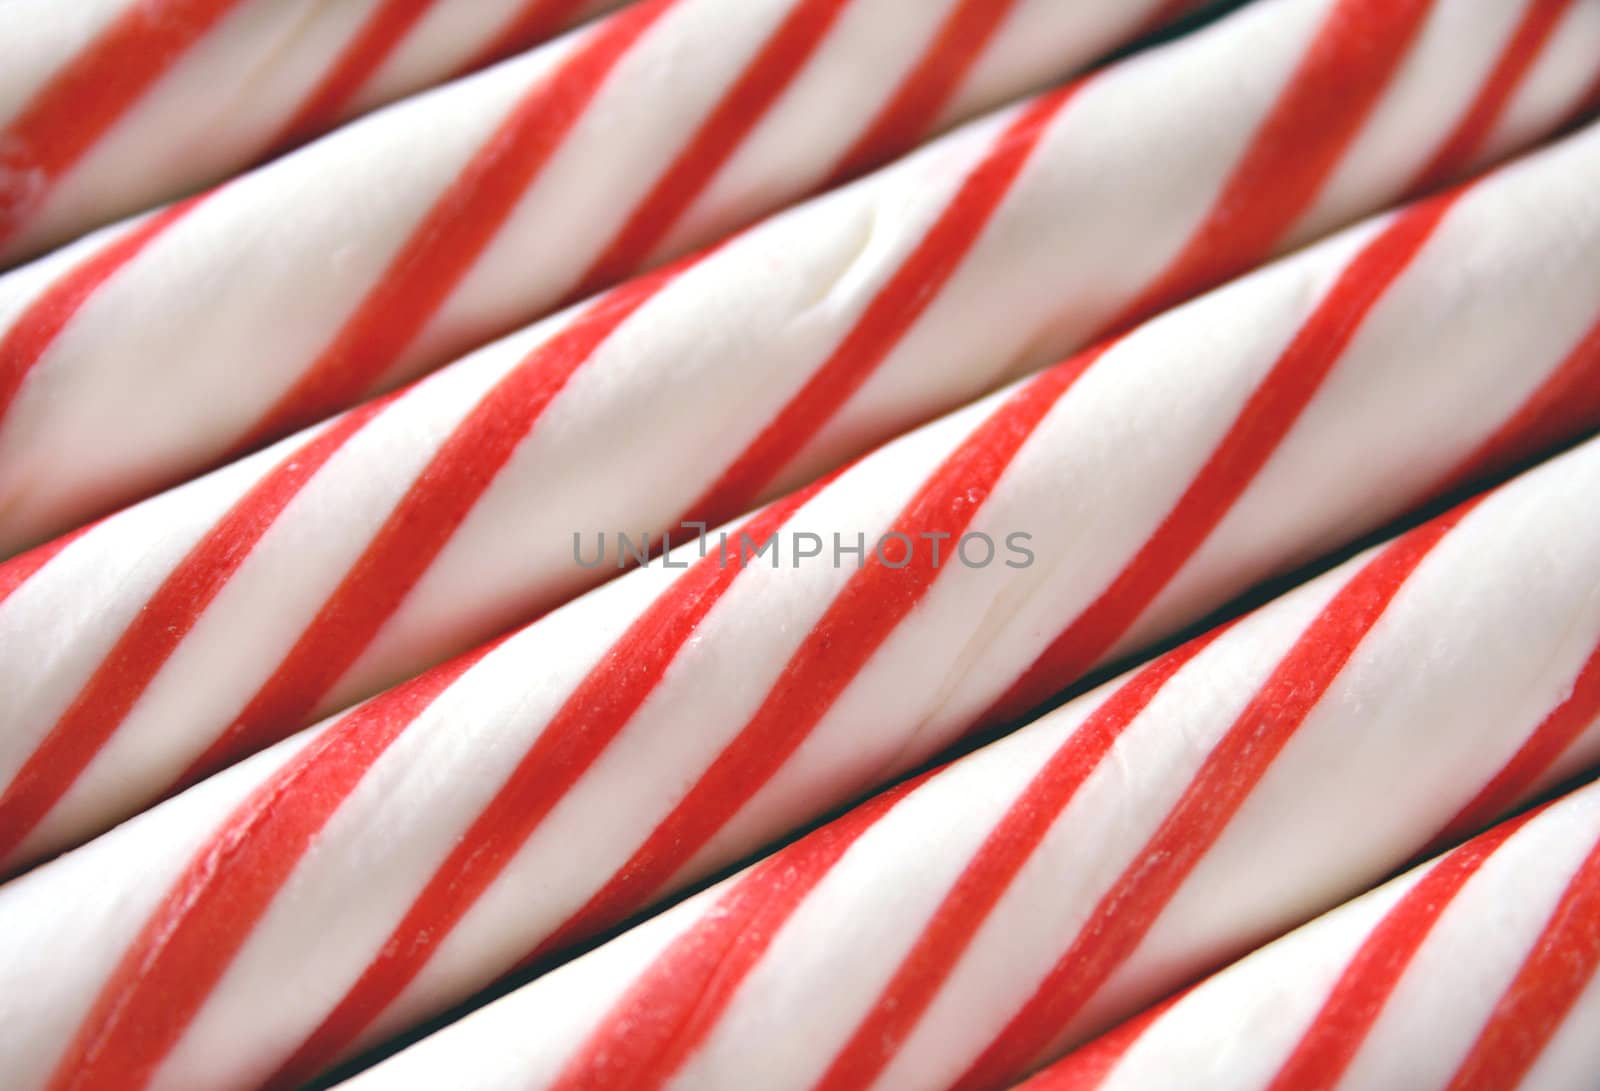 Candy Canes by thephotoguy